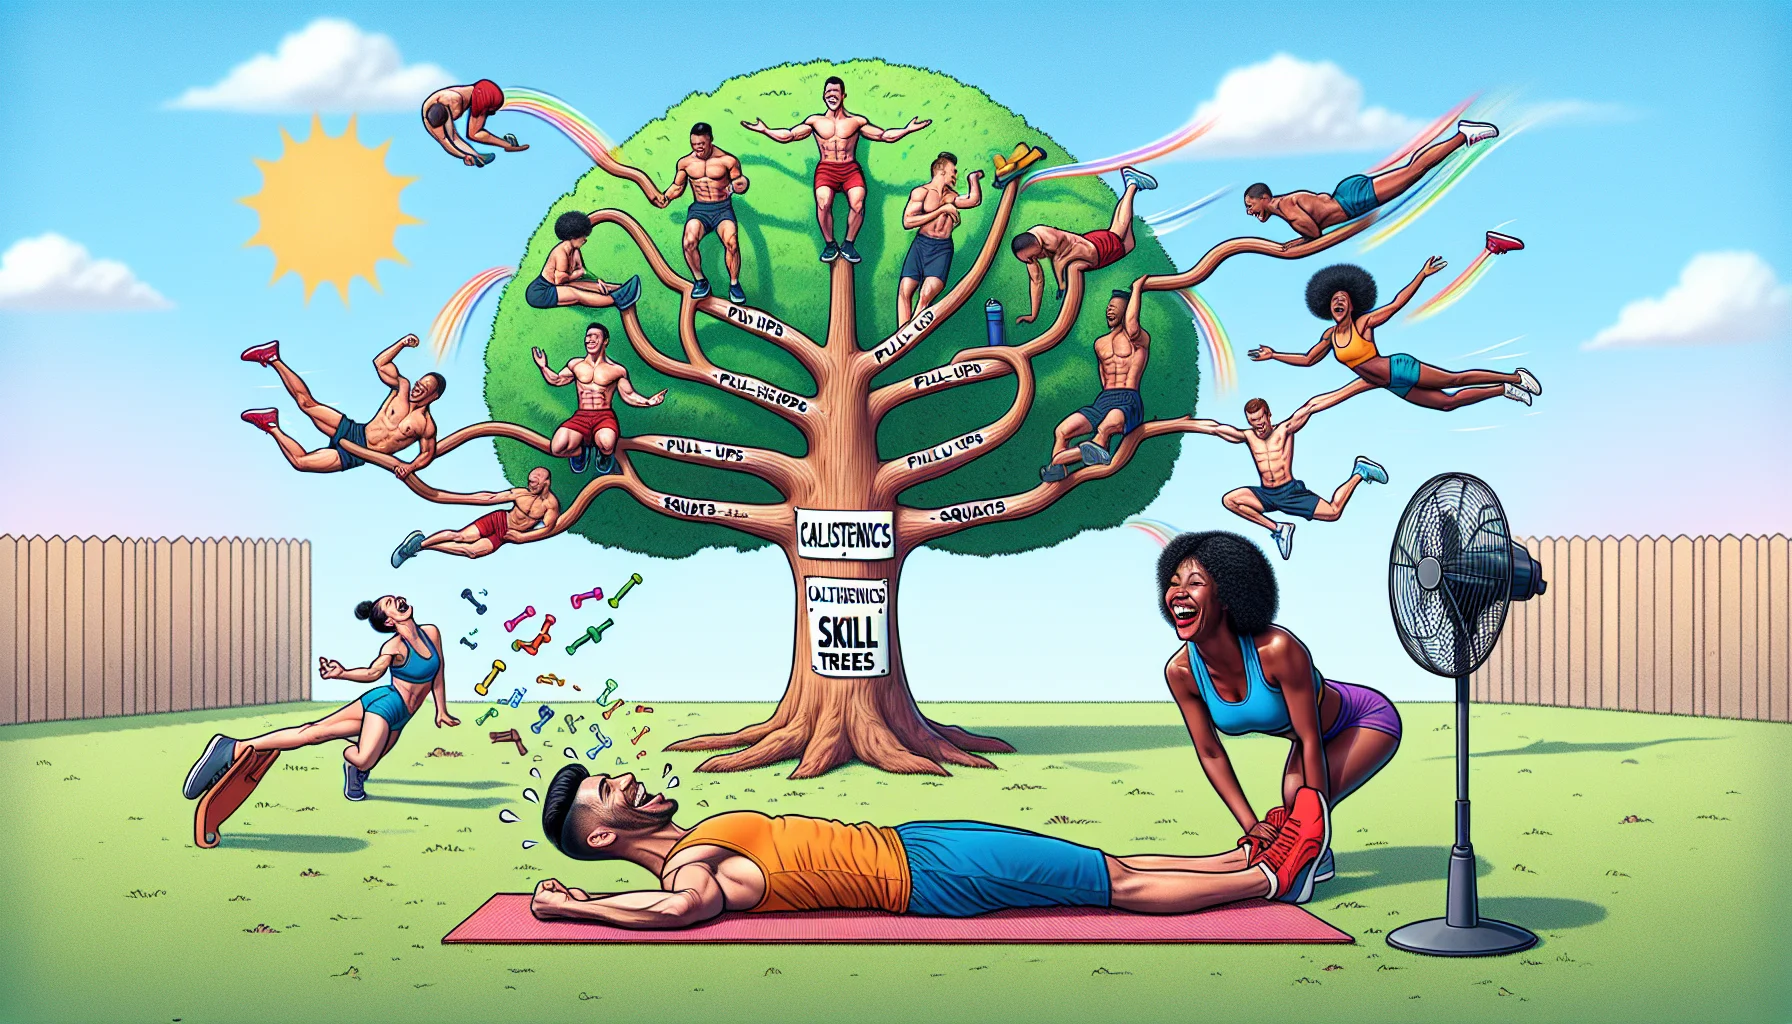 A comedic image showcasing a calisthenics skill tree, inviting viewers to engage in physical activity. In the center, there is a colorful tree with branches depicting various calisthenics exercises like push-ups, pull-ups, squats, etc. At the base of the tree is a cheerful and energetic male fitness instructor of Hispanic descent merrily demonstrating a plank. On the other side, a black female fitness enthusiast is laughing heartily, while successfully performing a handstand - blown slightly off balance by the 'breeze' from a fan. The entire scenario is set in a sunny park, inviting onlookers to participate in the fitness routine.